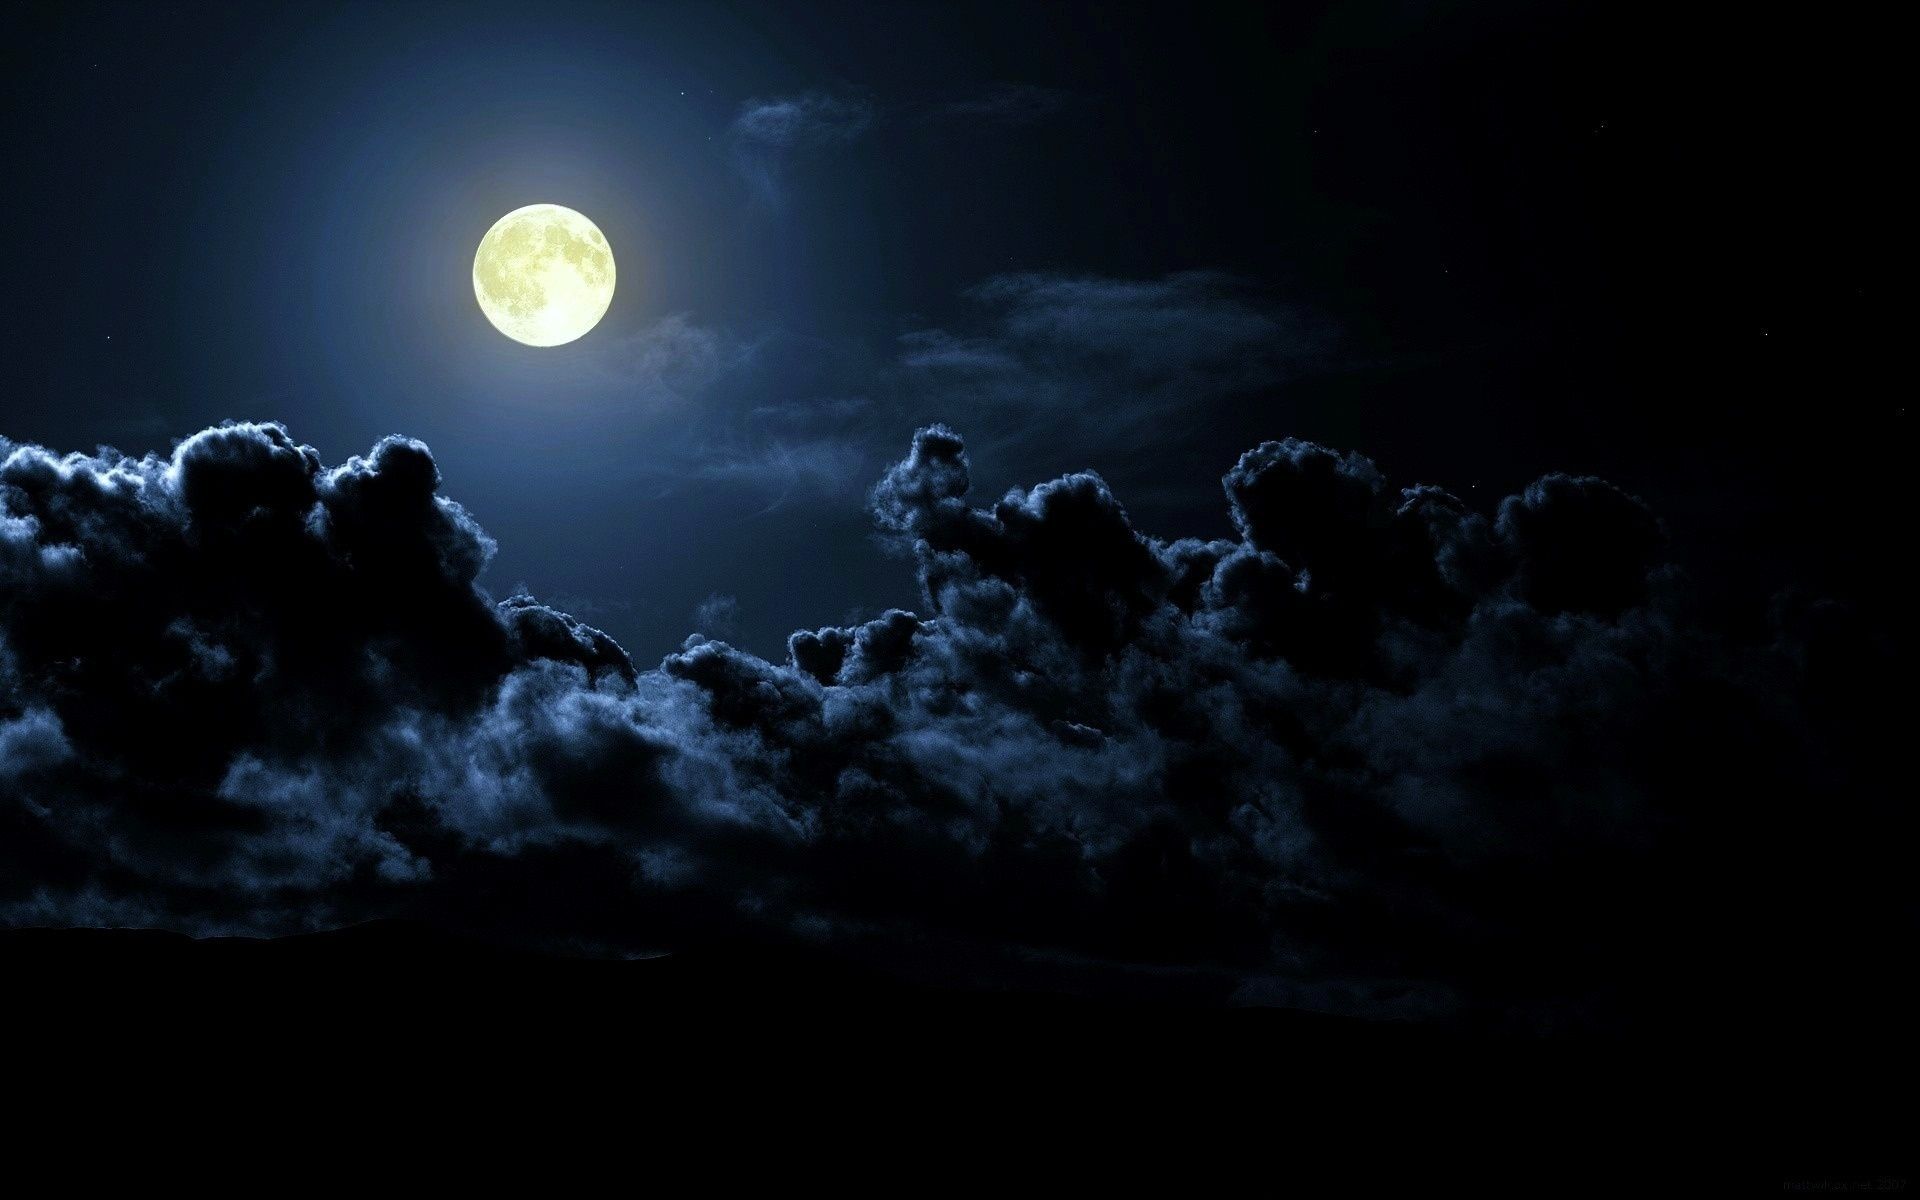 Night, moon, dark clouds, clouds, nature | Free HD wallpapers | The ...